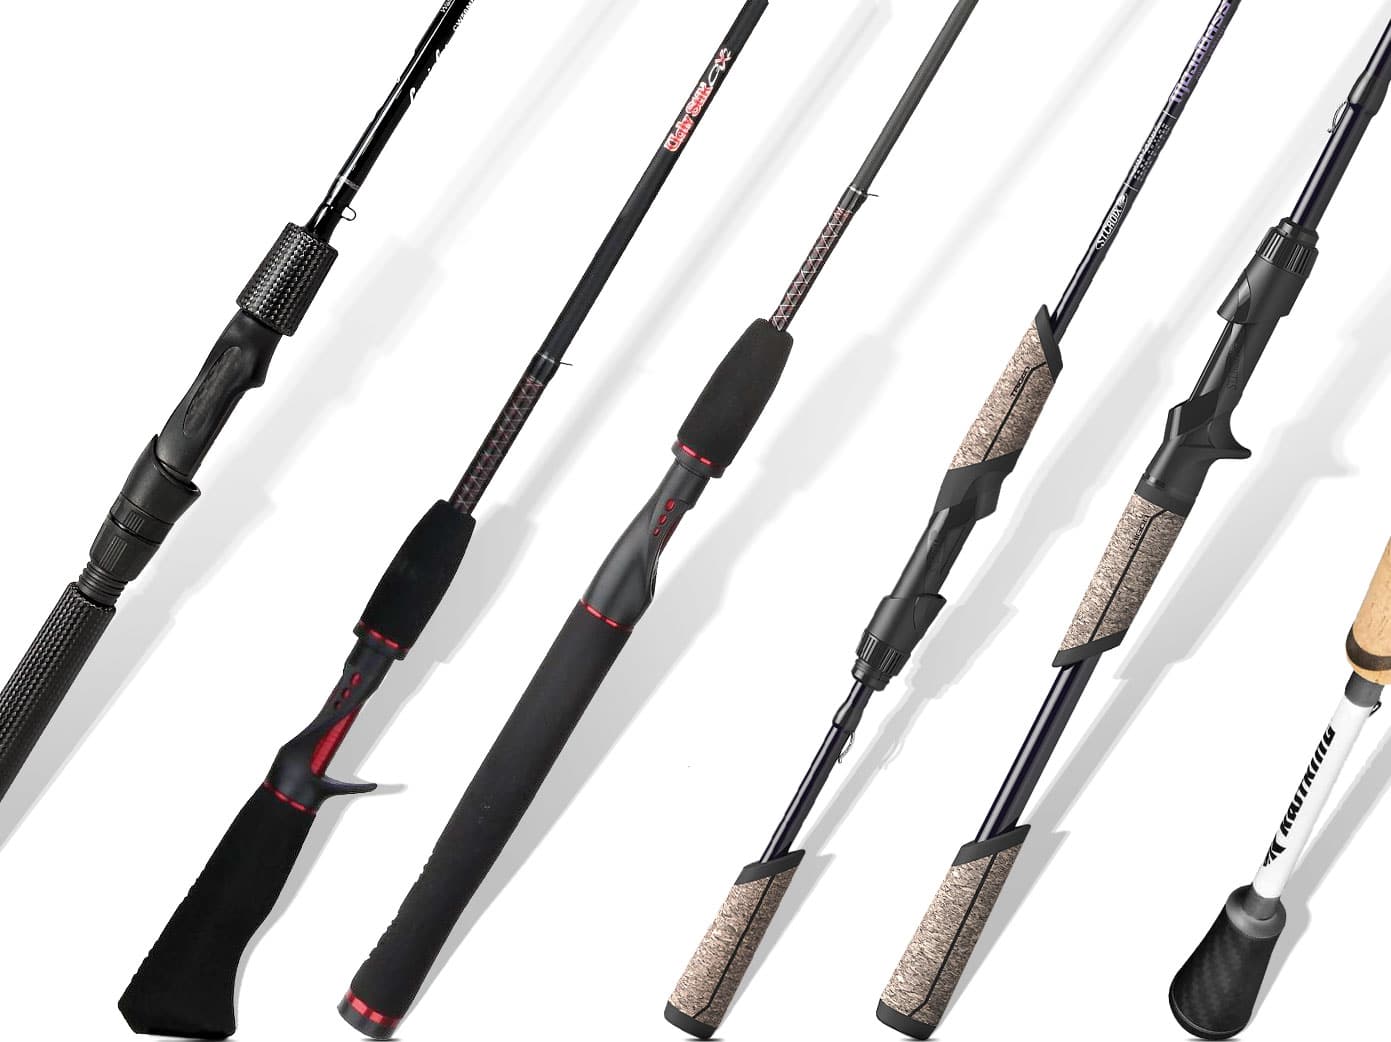 Four Great Fishing Rods for Freshwater